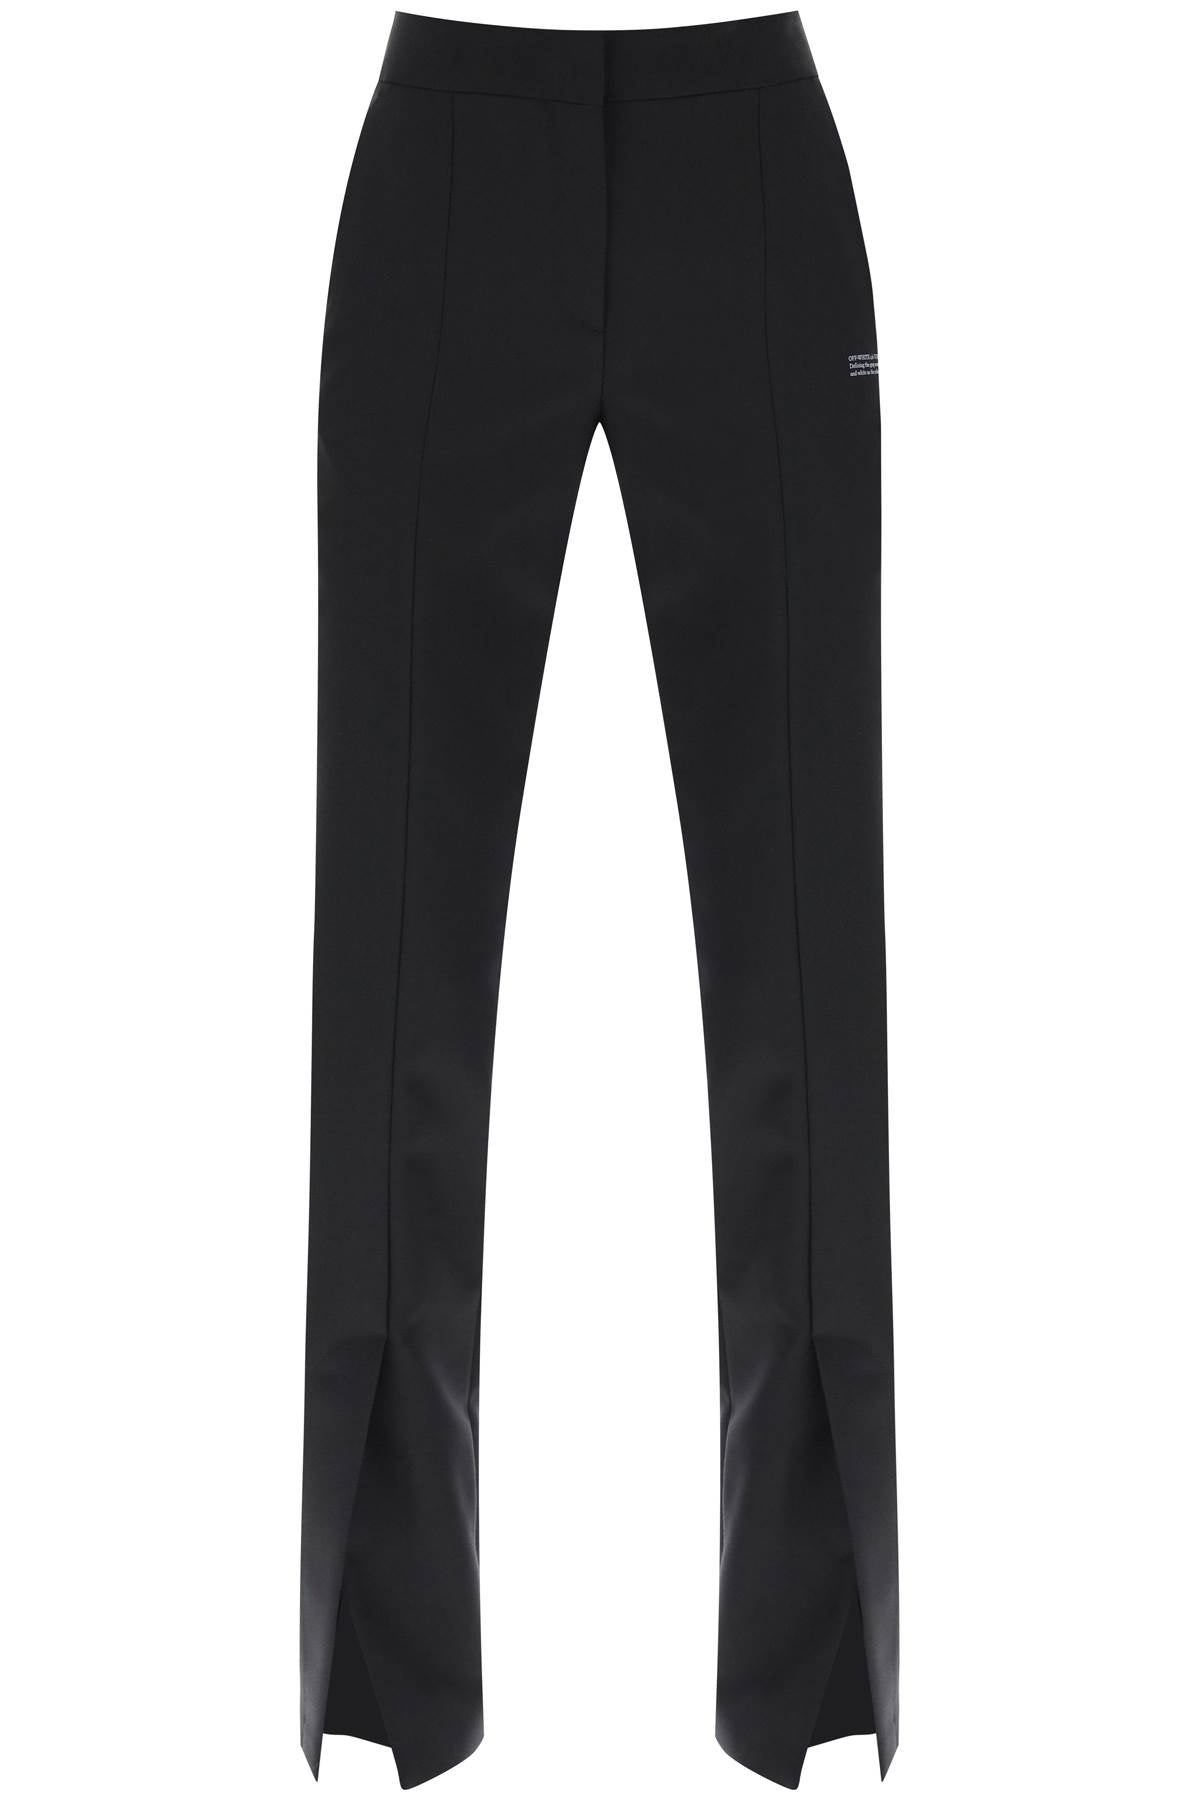 Off-white corporate tailoring pants-0